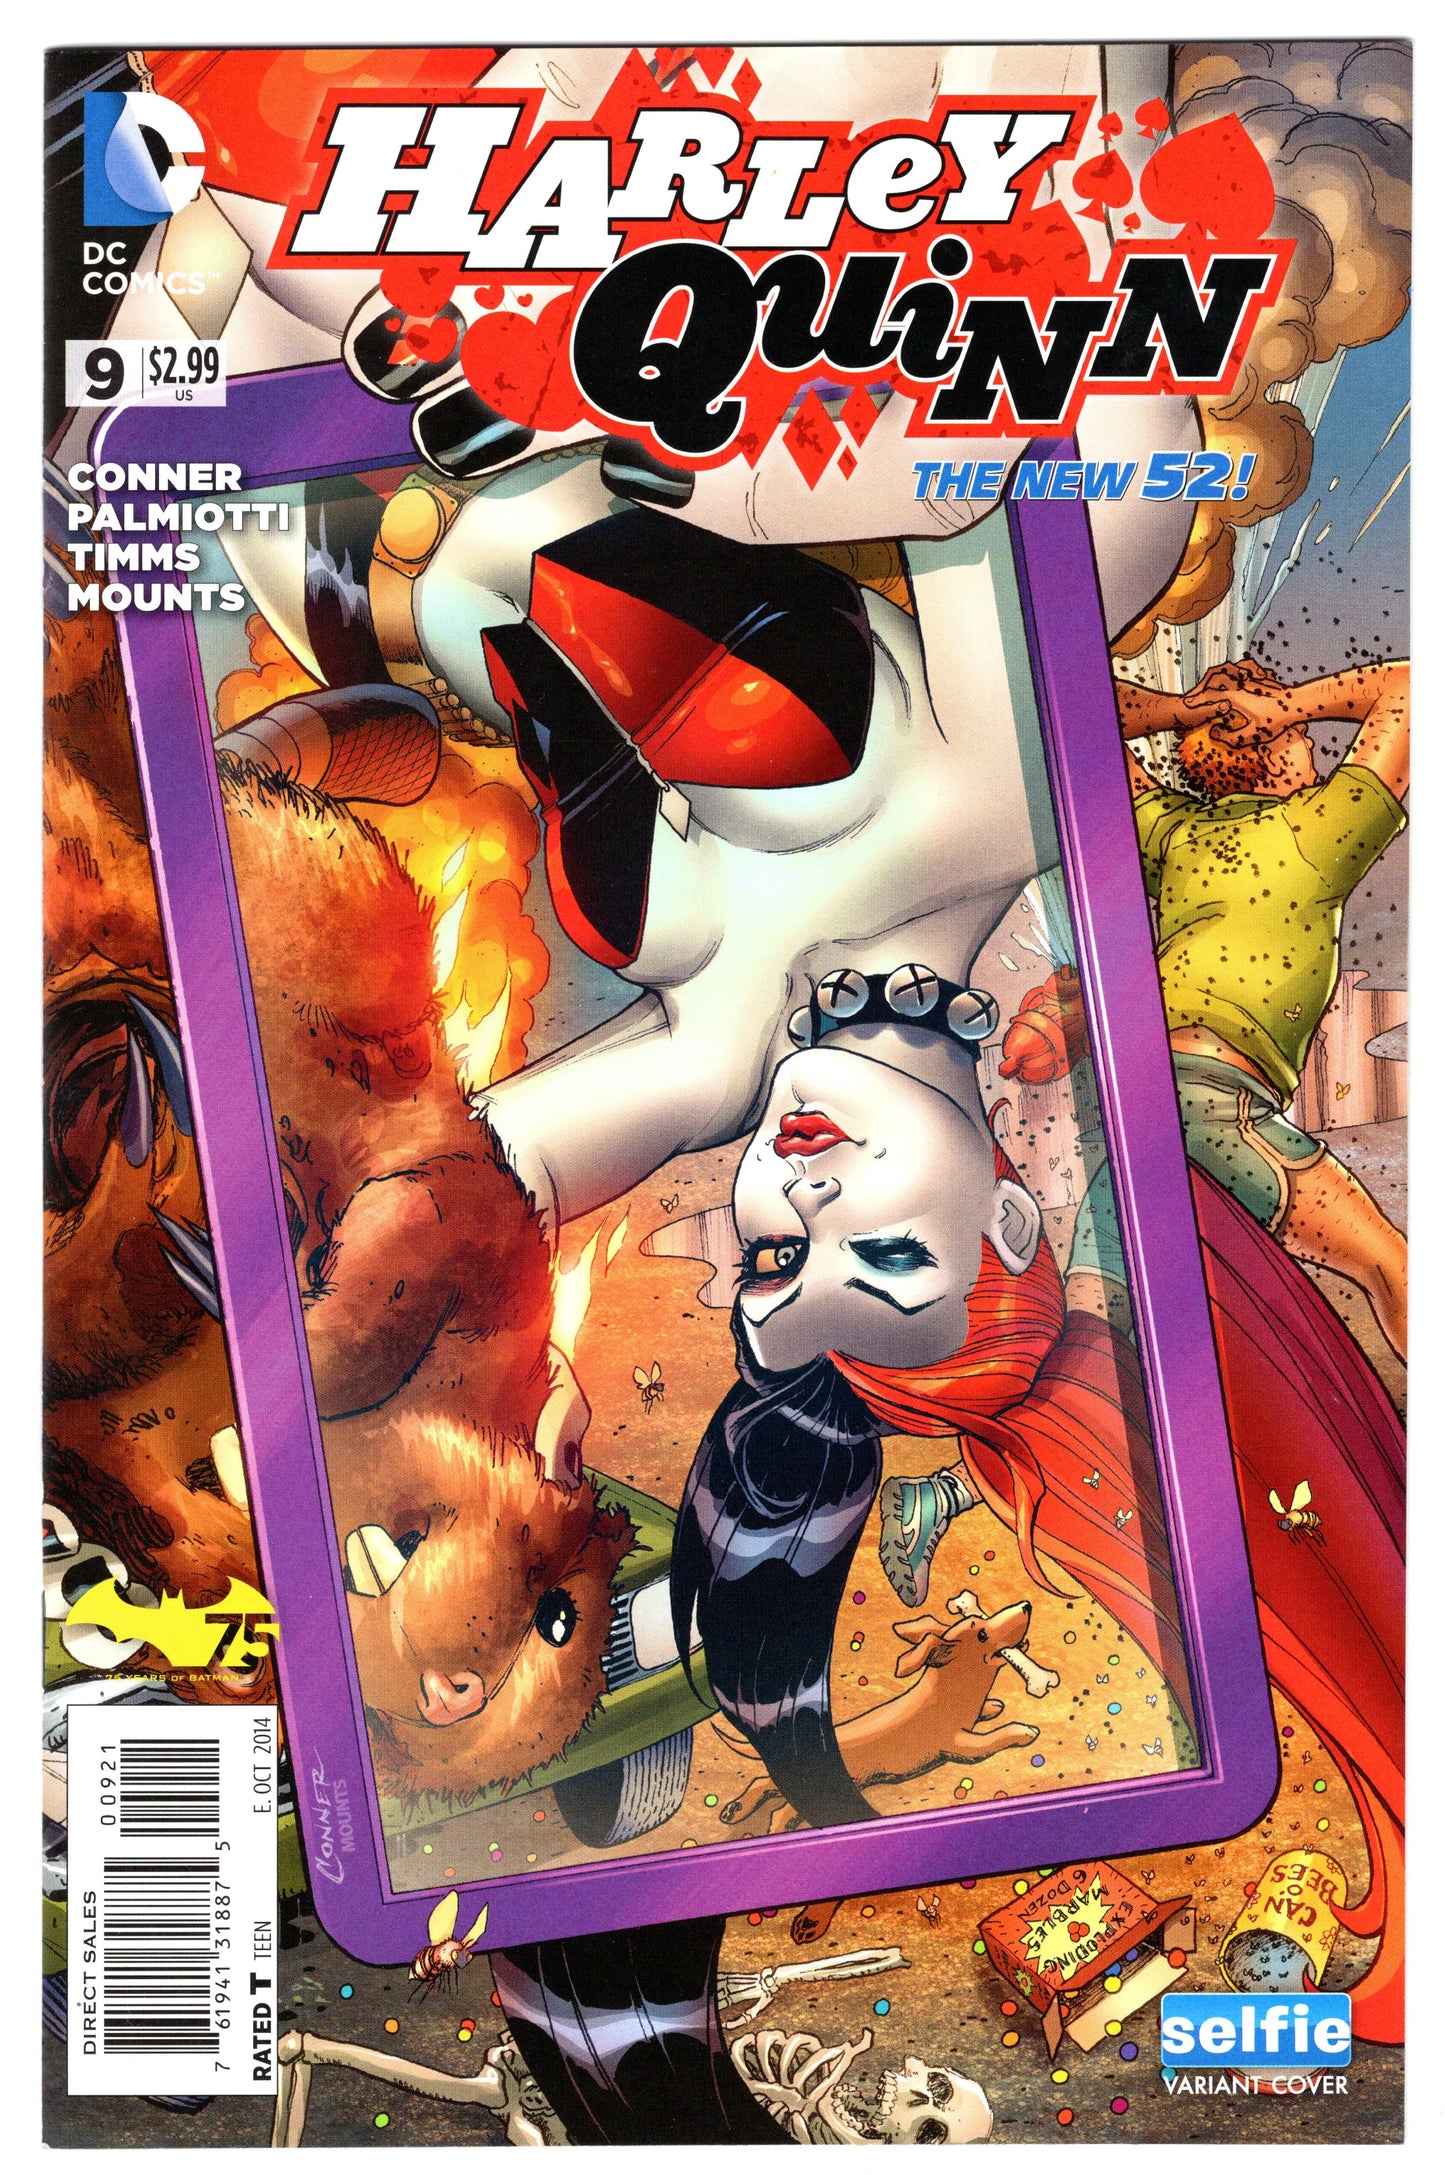 Harley Quinn - Issue #9 "Variant Cover" (October, 2014 - DC Comics) NM-